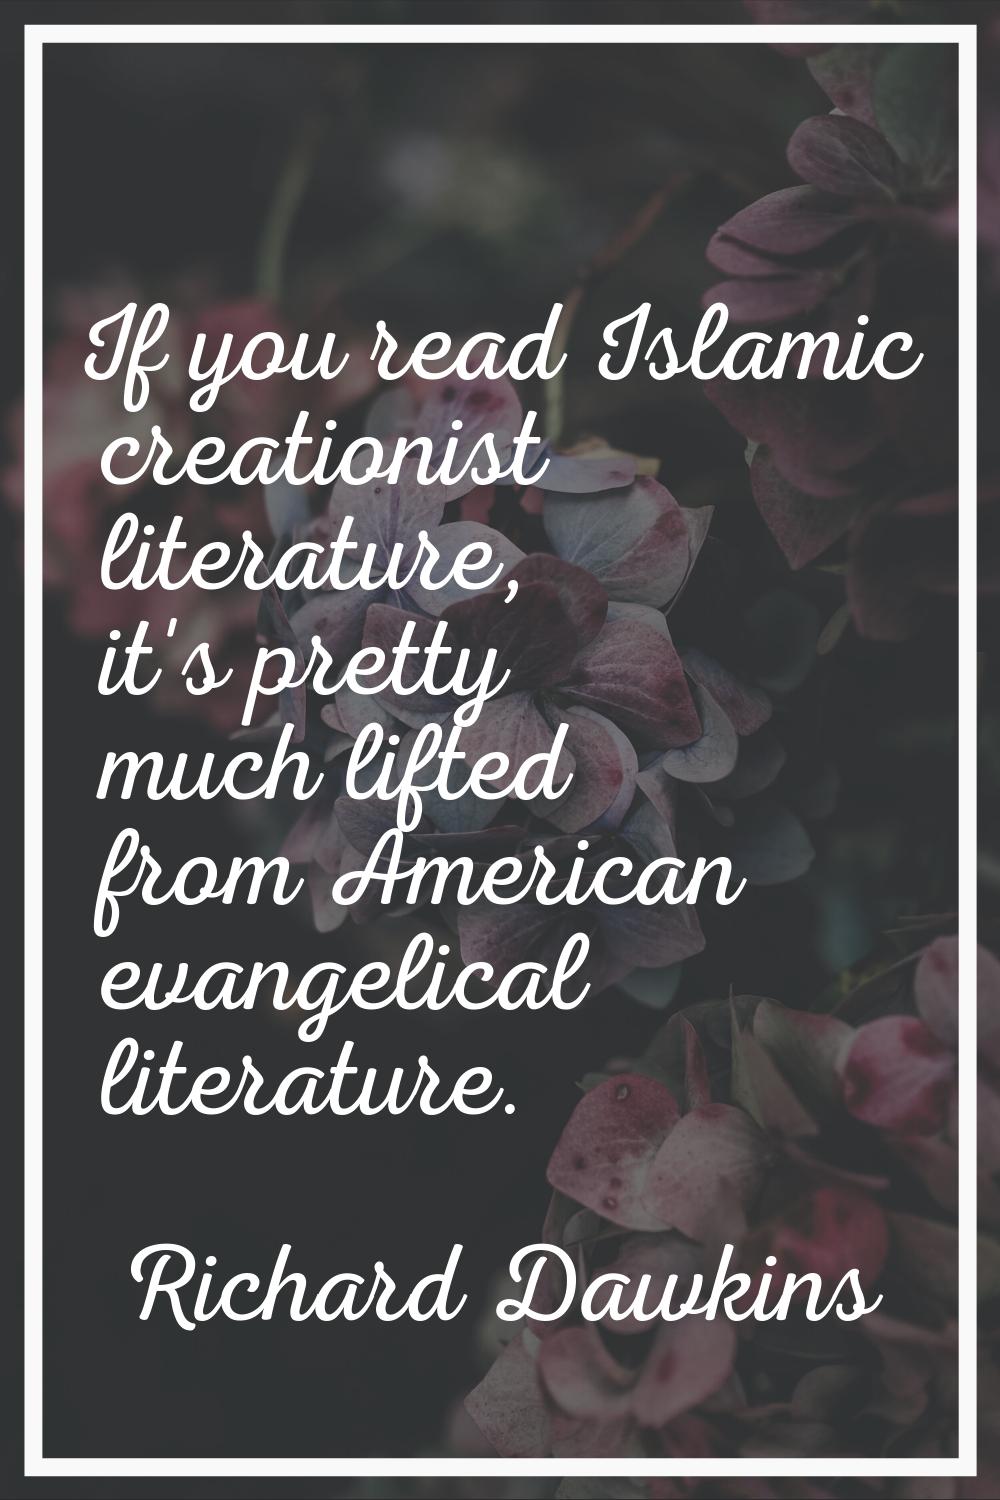 If you read Islamic creationist literature, it's pretty much lifted from American evangelical liter